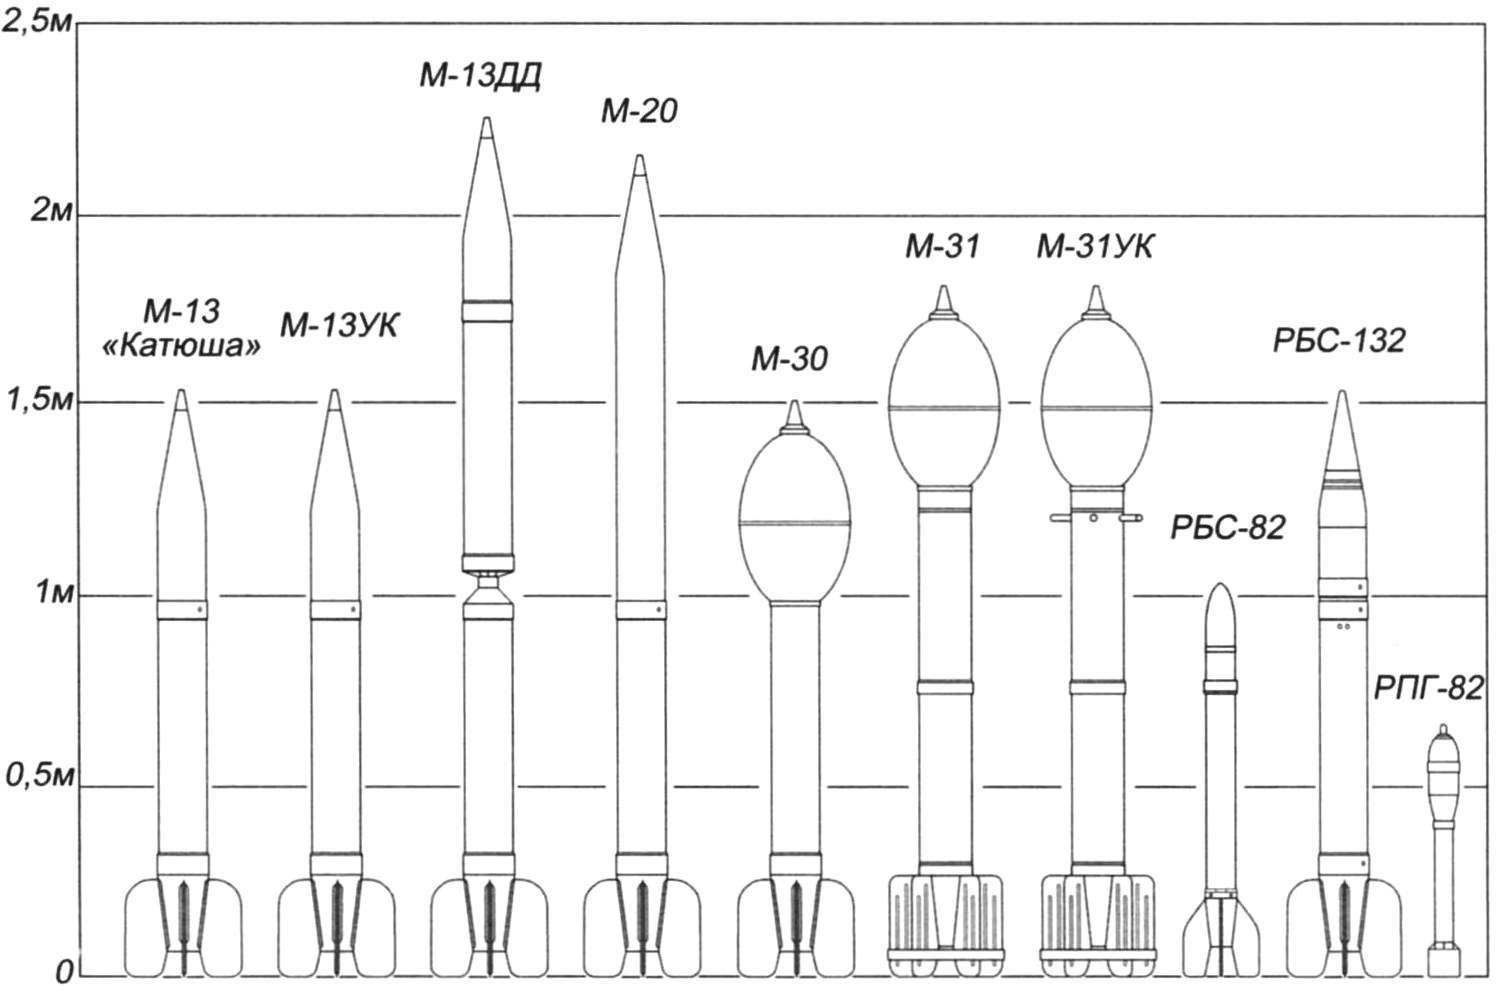 Soviet missiles during the great Patriotic war